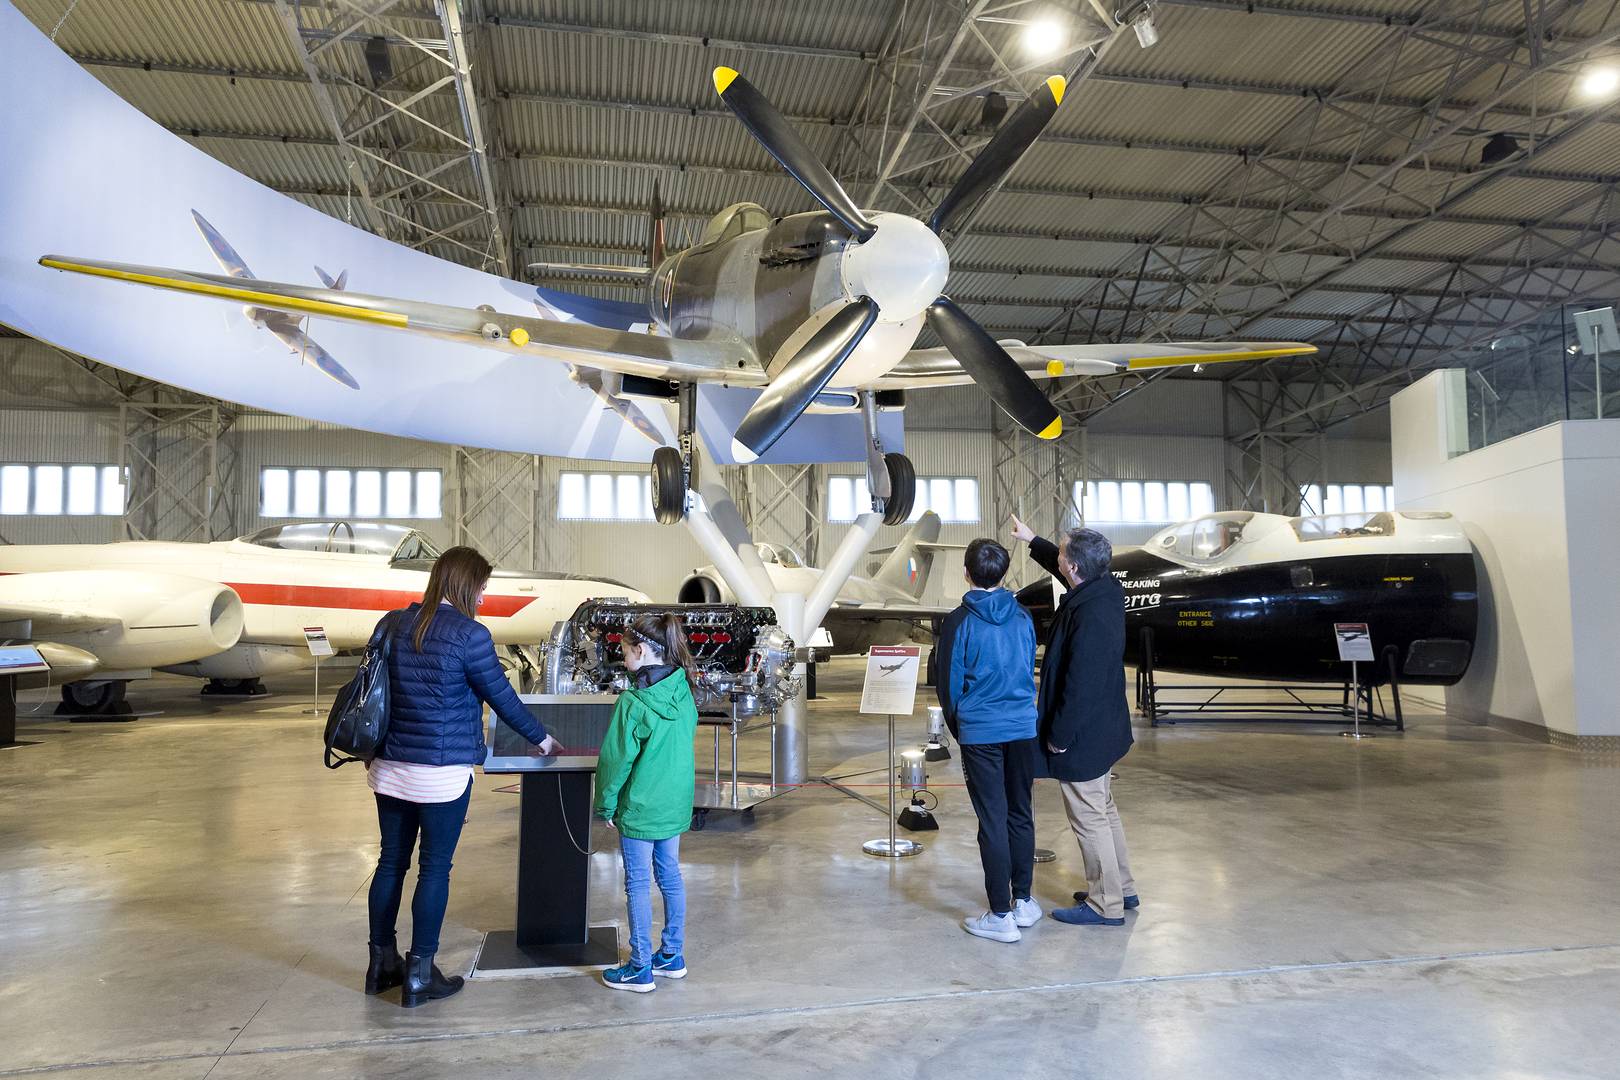 A family underneath a Spitfire aircraft in the Military Aviation Hangar at the National A Museum of Flight © Ruth Armstrong Photography, Image © Ruth Armstrong Photography